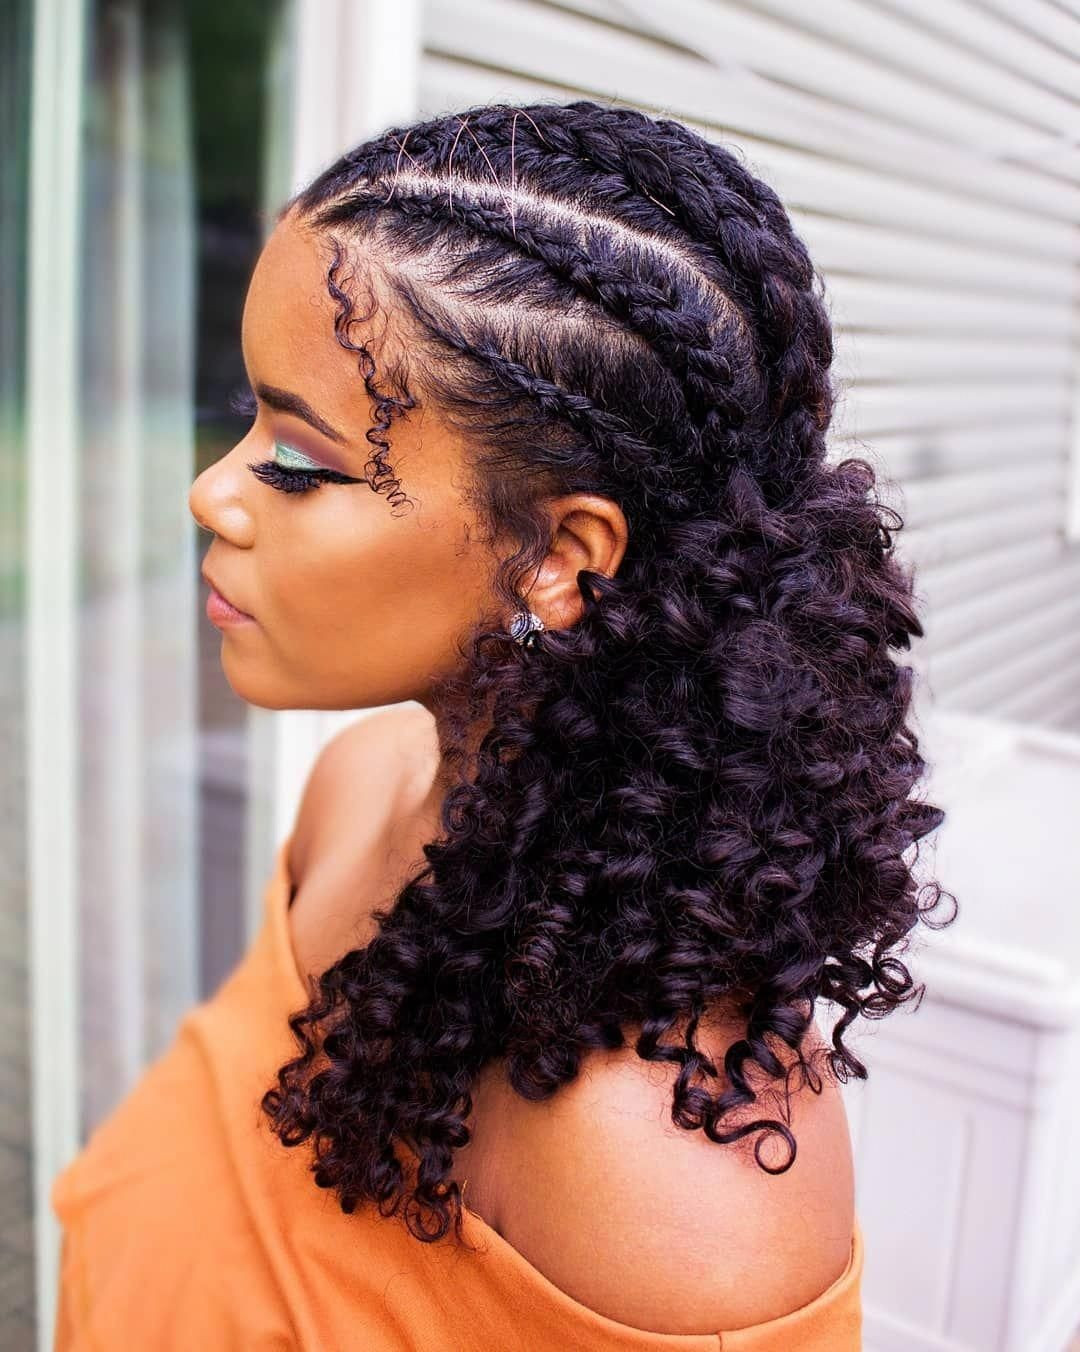 Braided Natural Hairstyles
 35 Natural Braided Hairstyles Without Weave